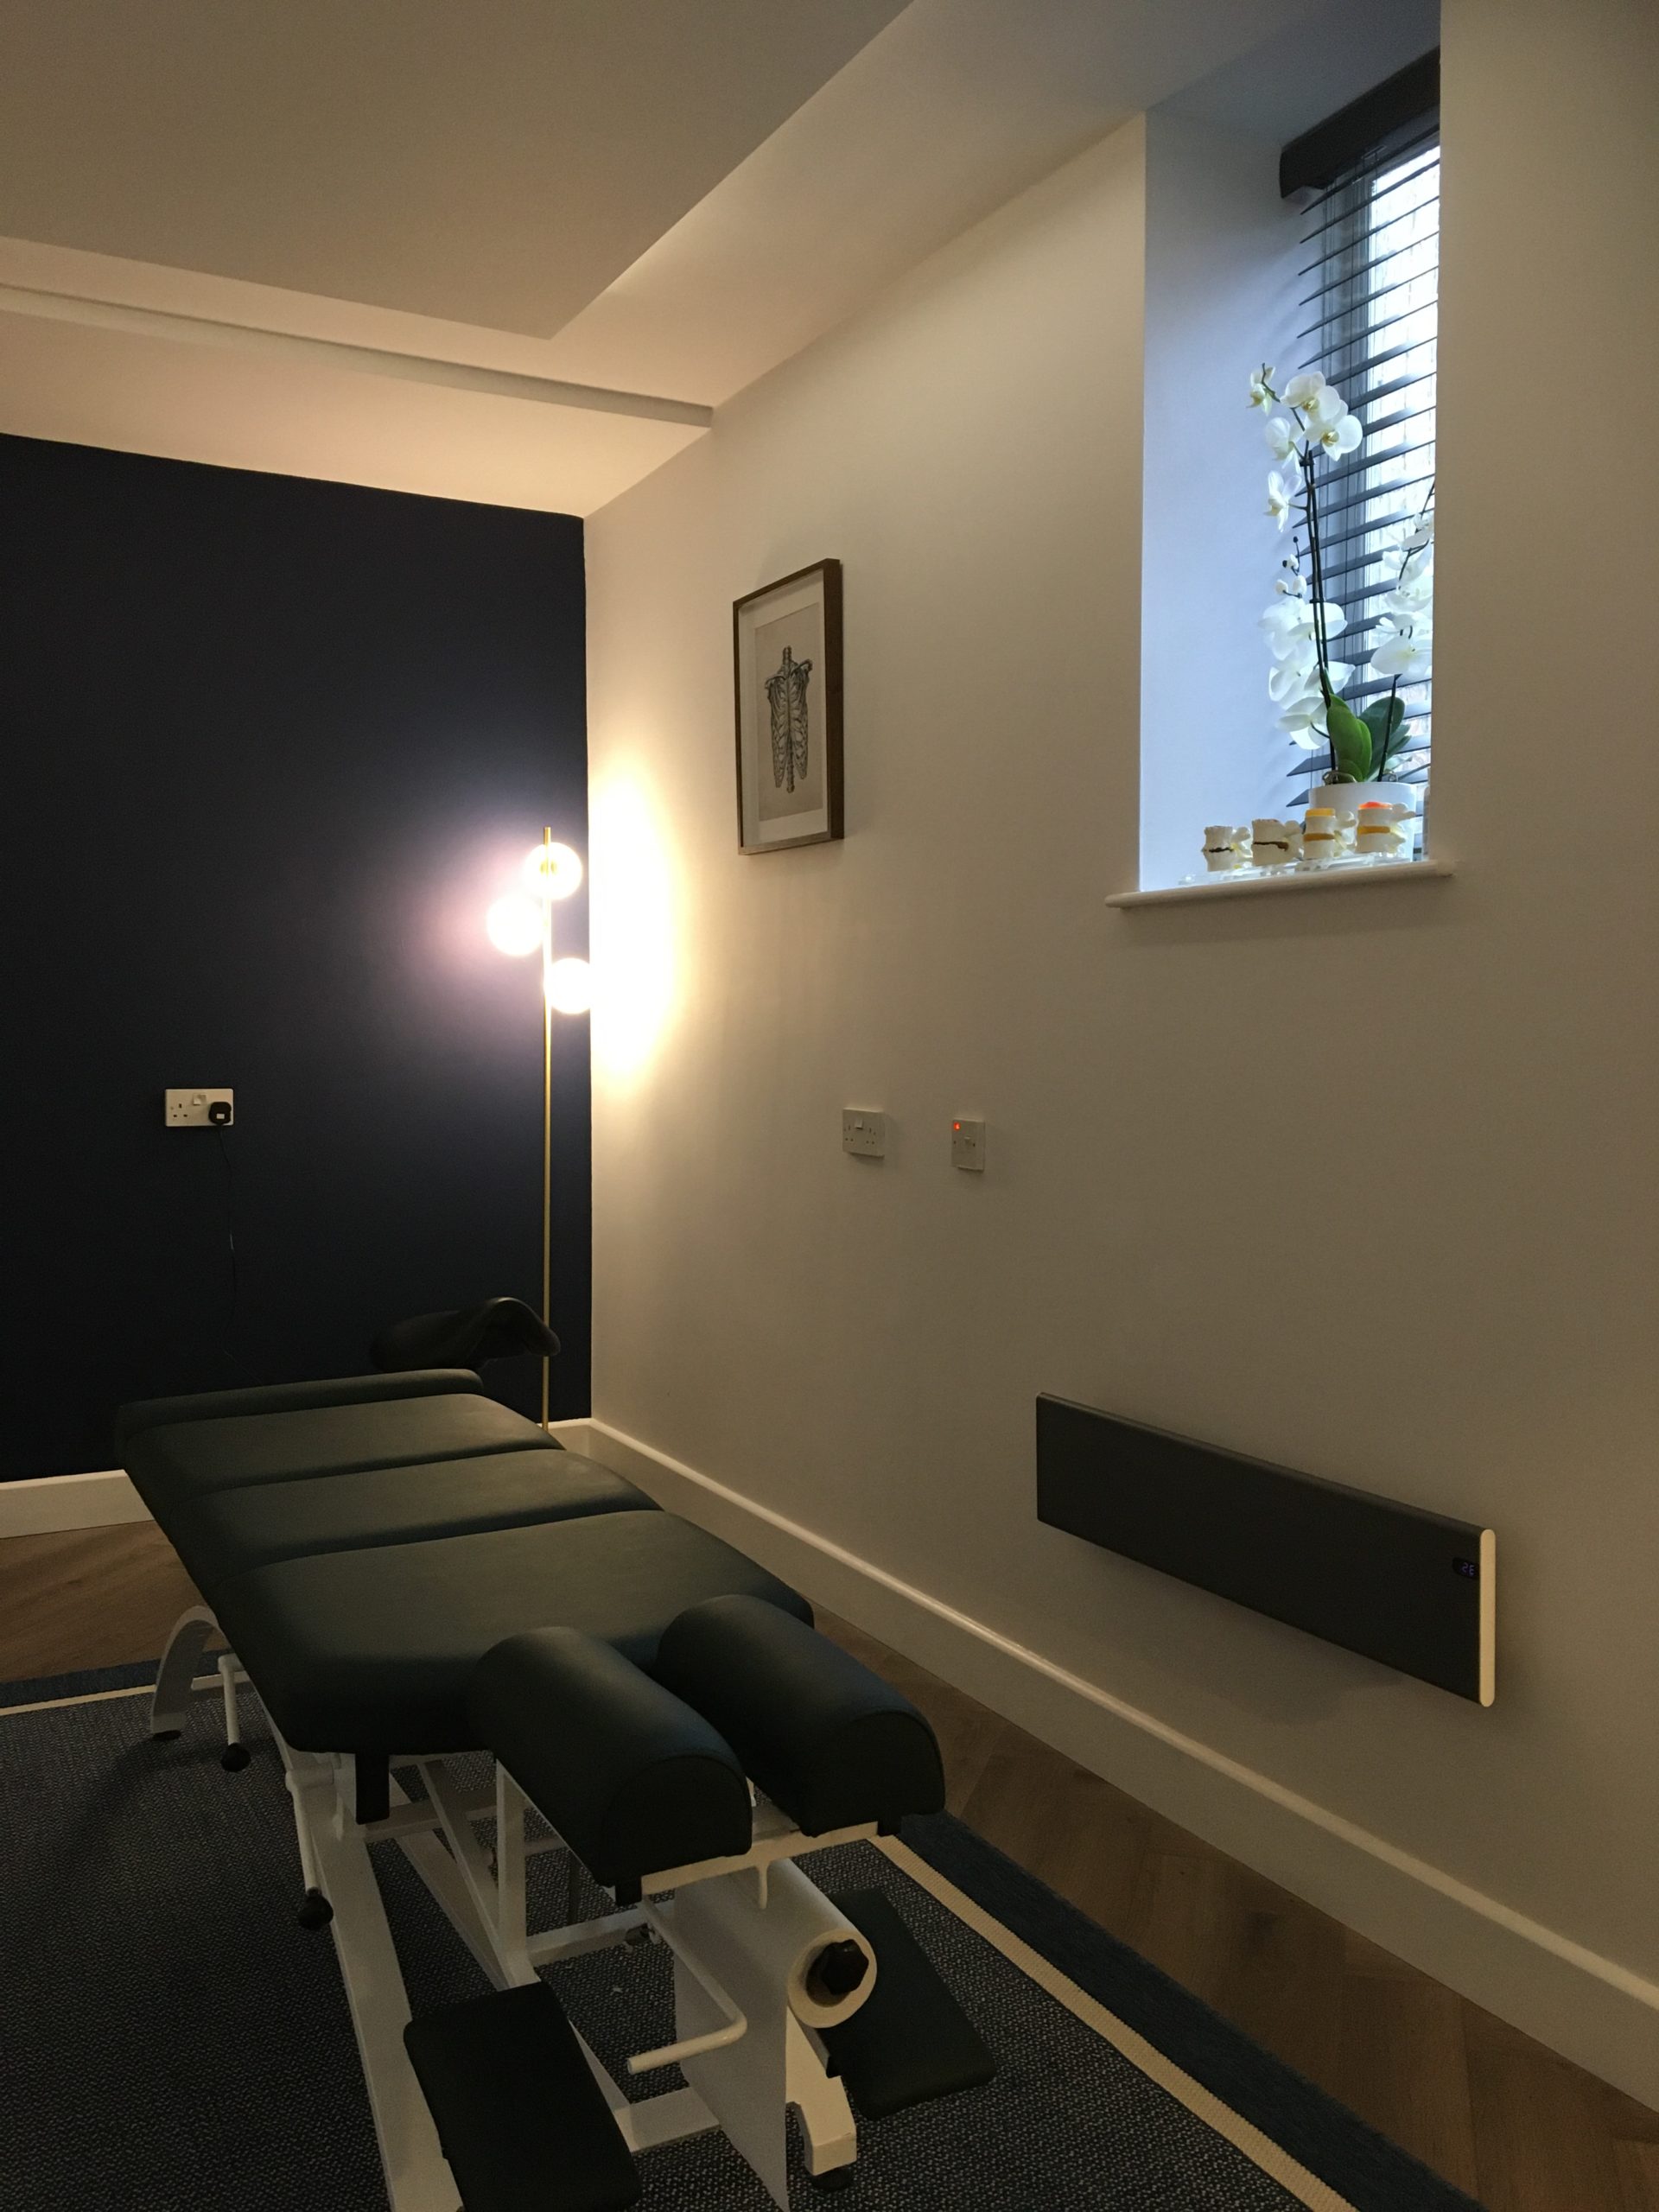 Wantage Chiropractor treatment room